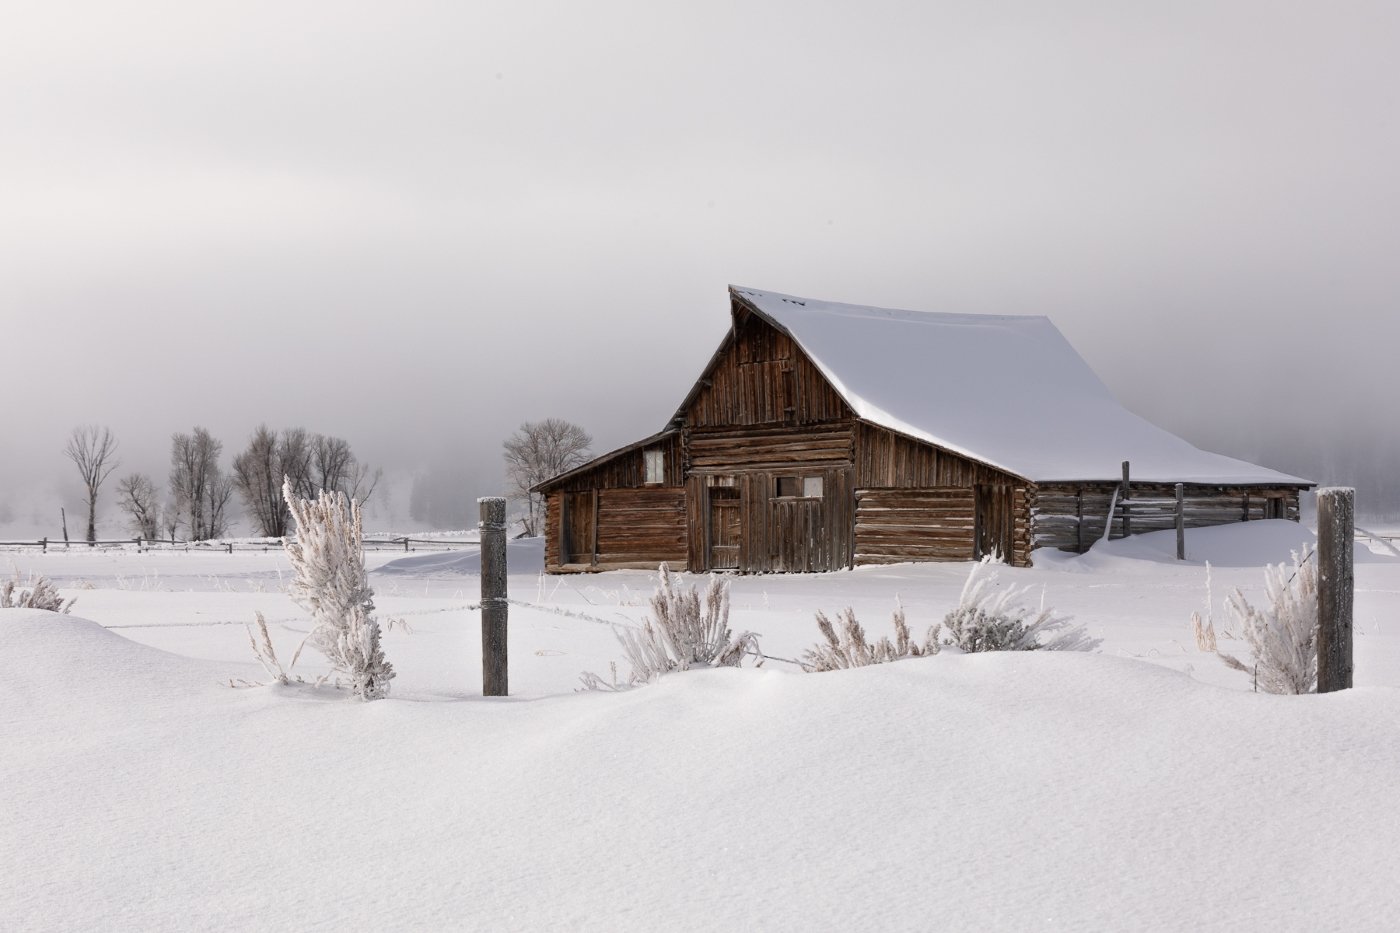 Barn in the Snow, Cathy	Smart, Louisiana Photographic Society, 1st Place